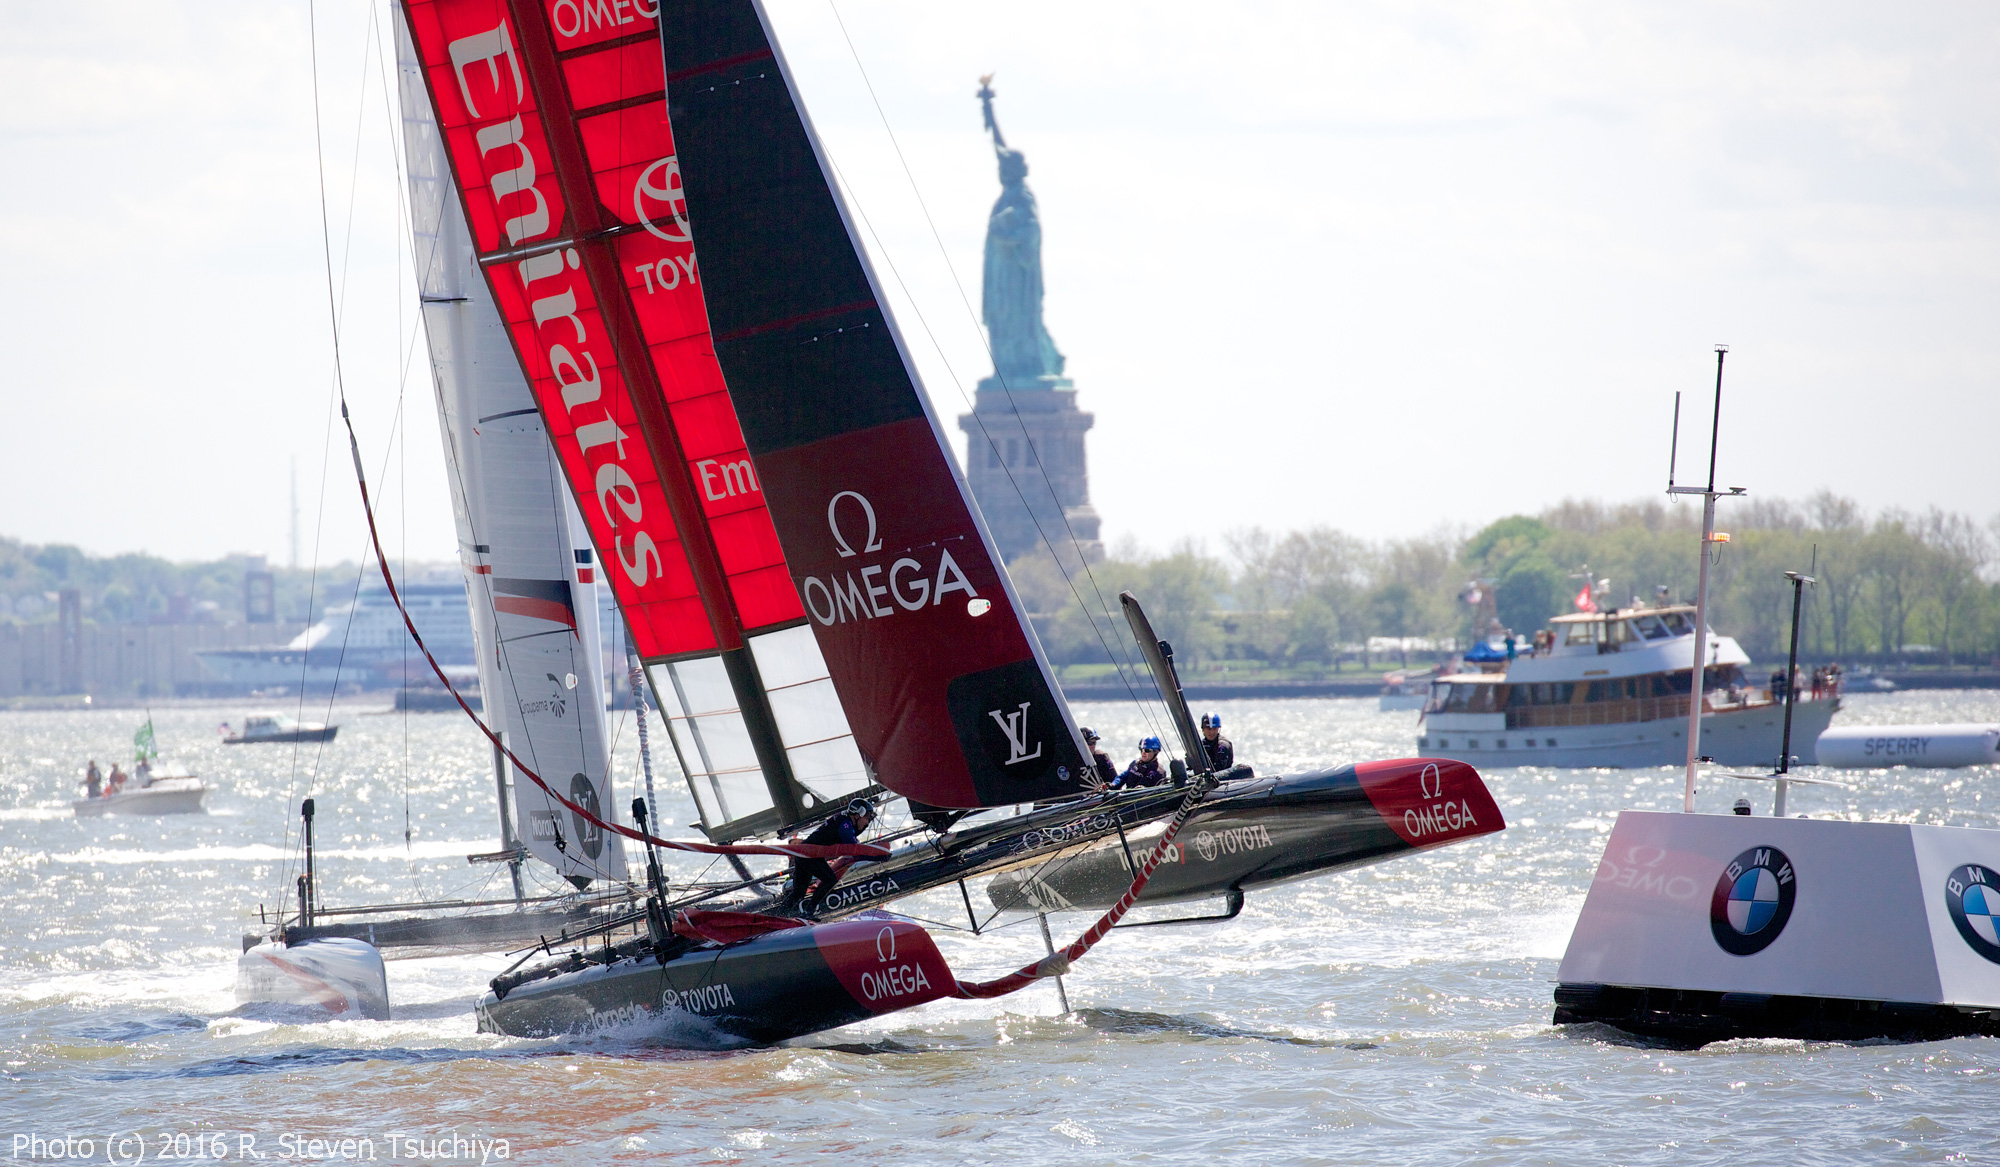 Emirates Team New Zealand finished first in Race 3, and third in the earlier two races, winning the regatta and keeping their lead in the overall points standings.  Photo:©2016 R. Steven Tsuchiya